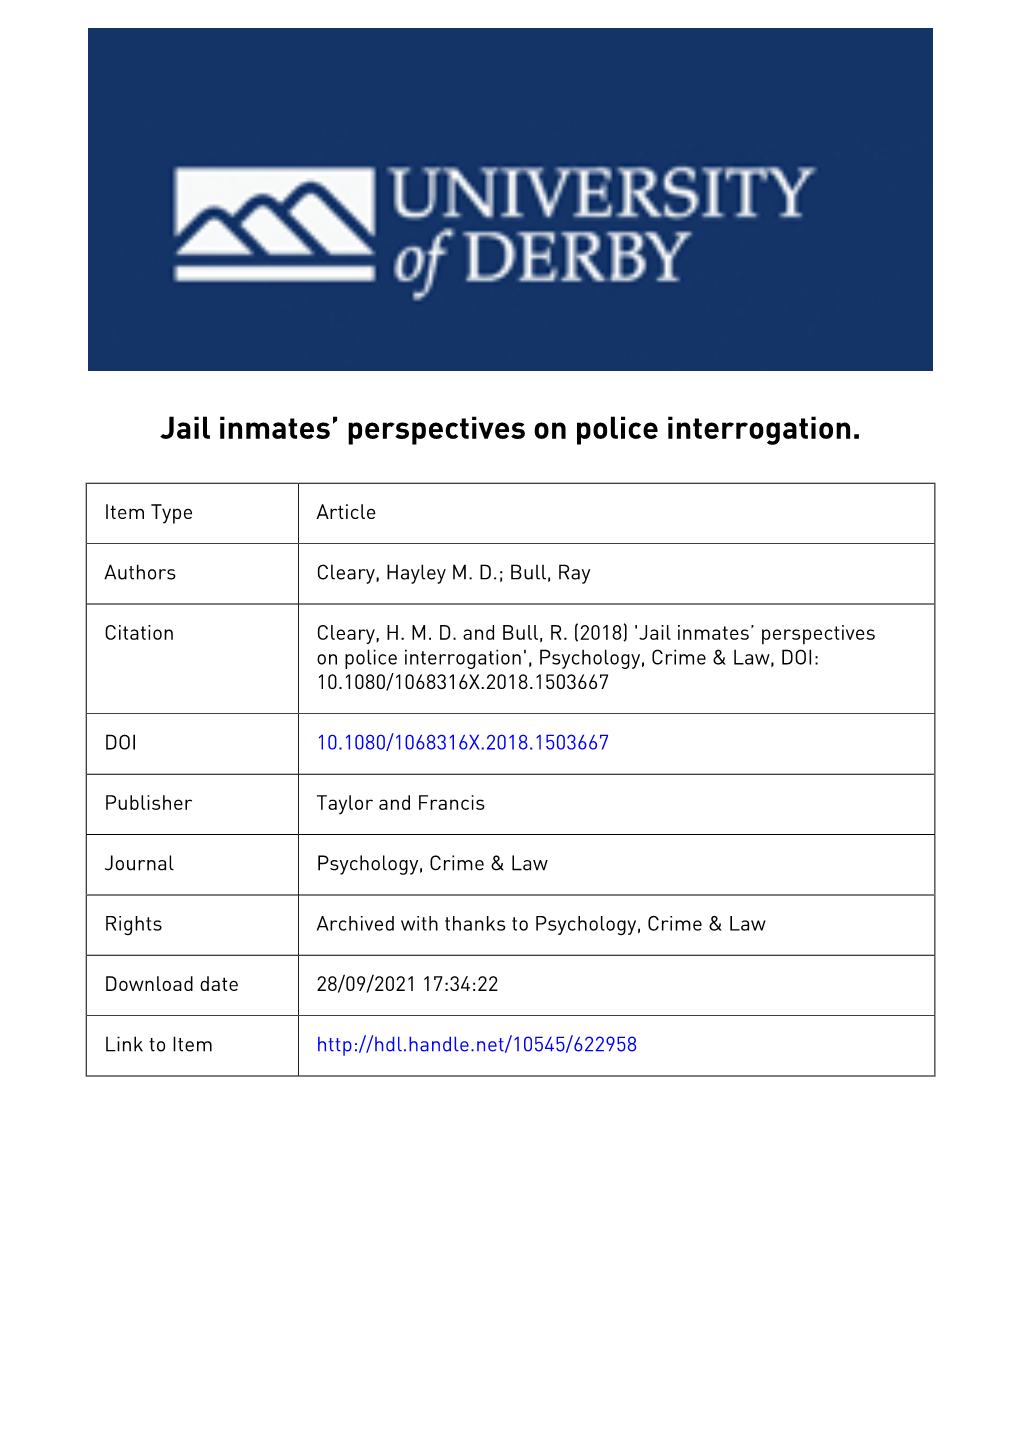 Jail Inmates' Perspectives on Police Interrogation by Hayley Cleary